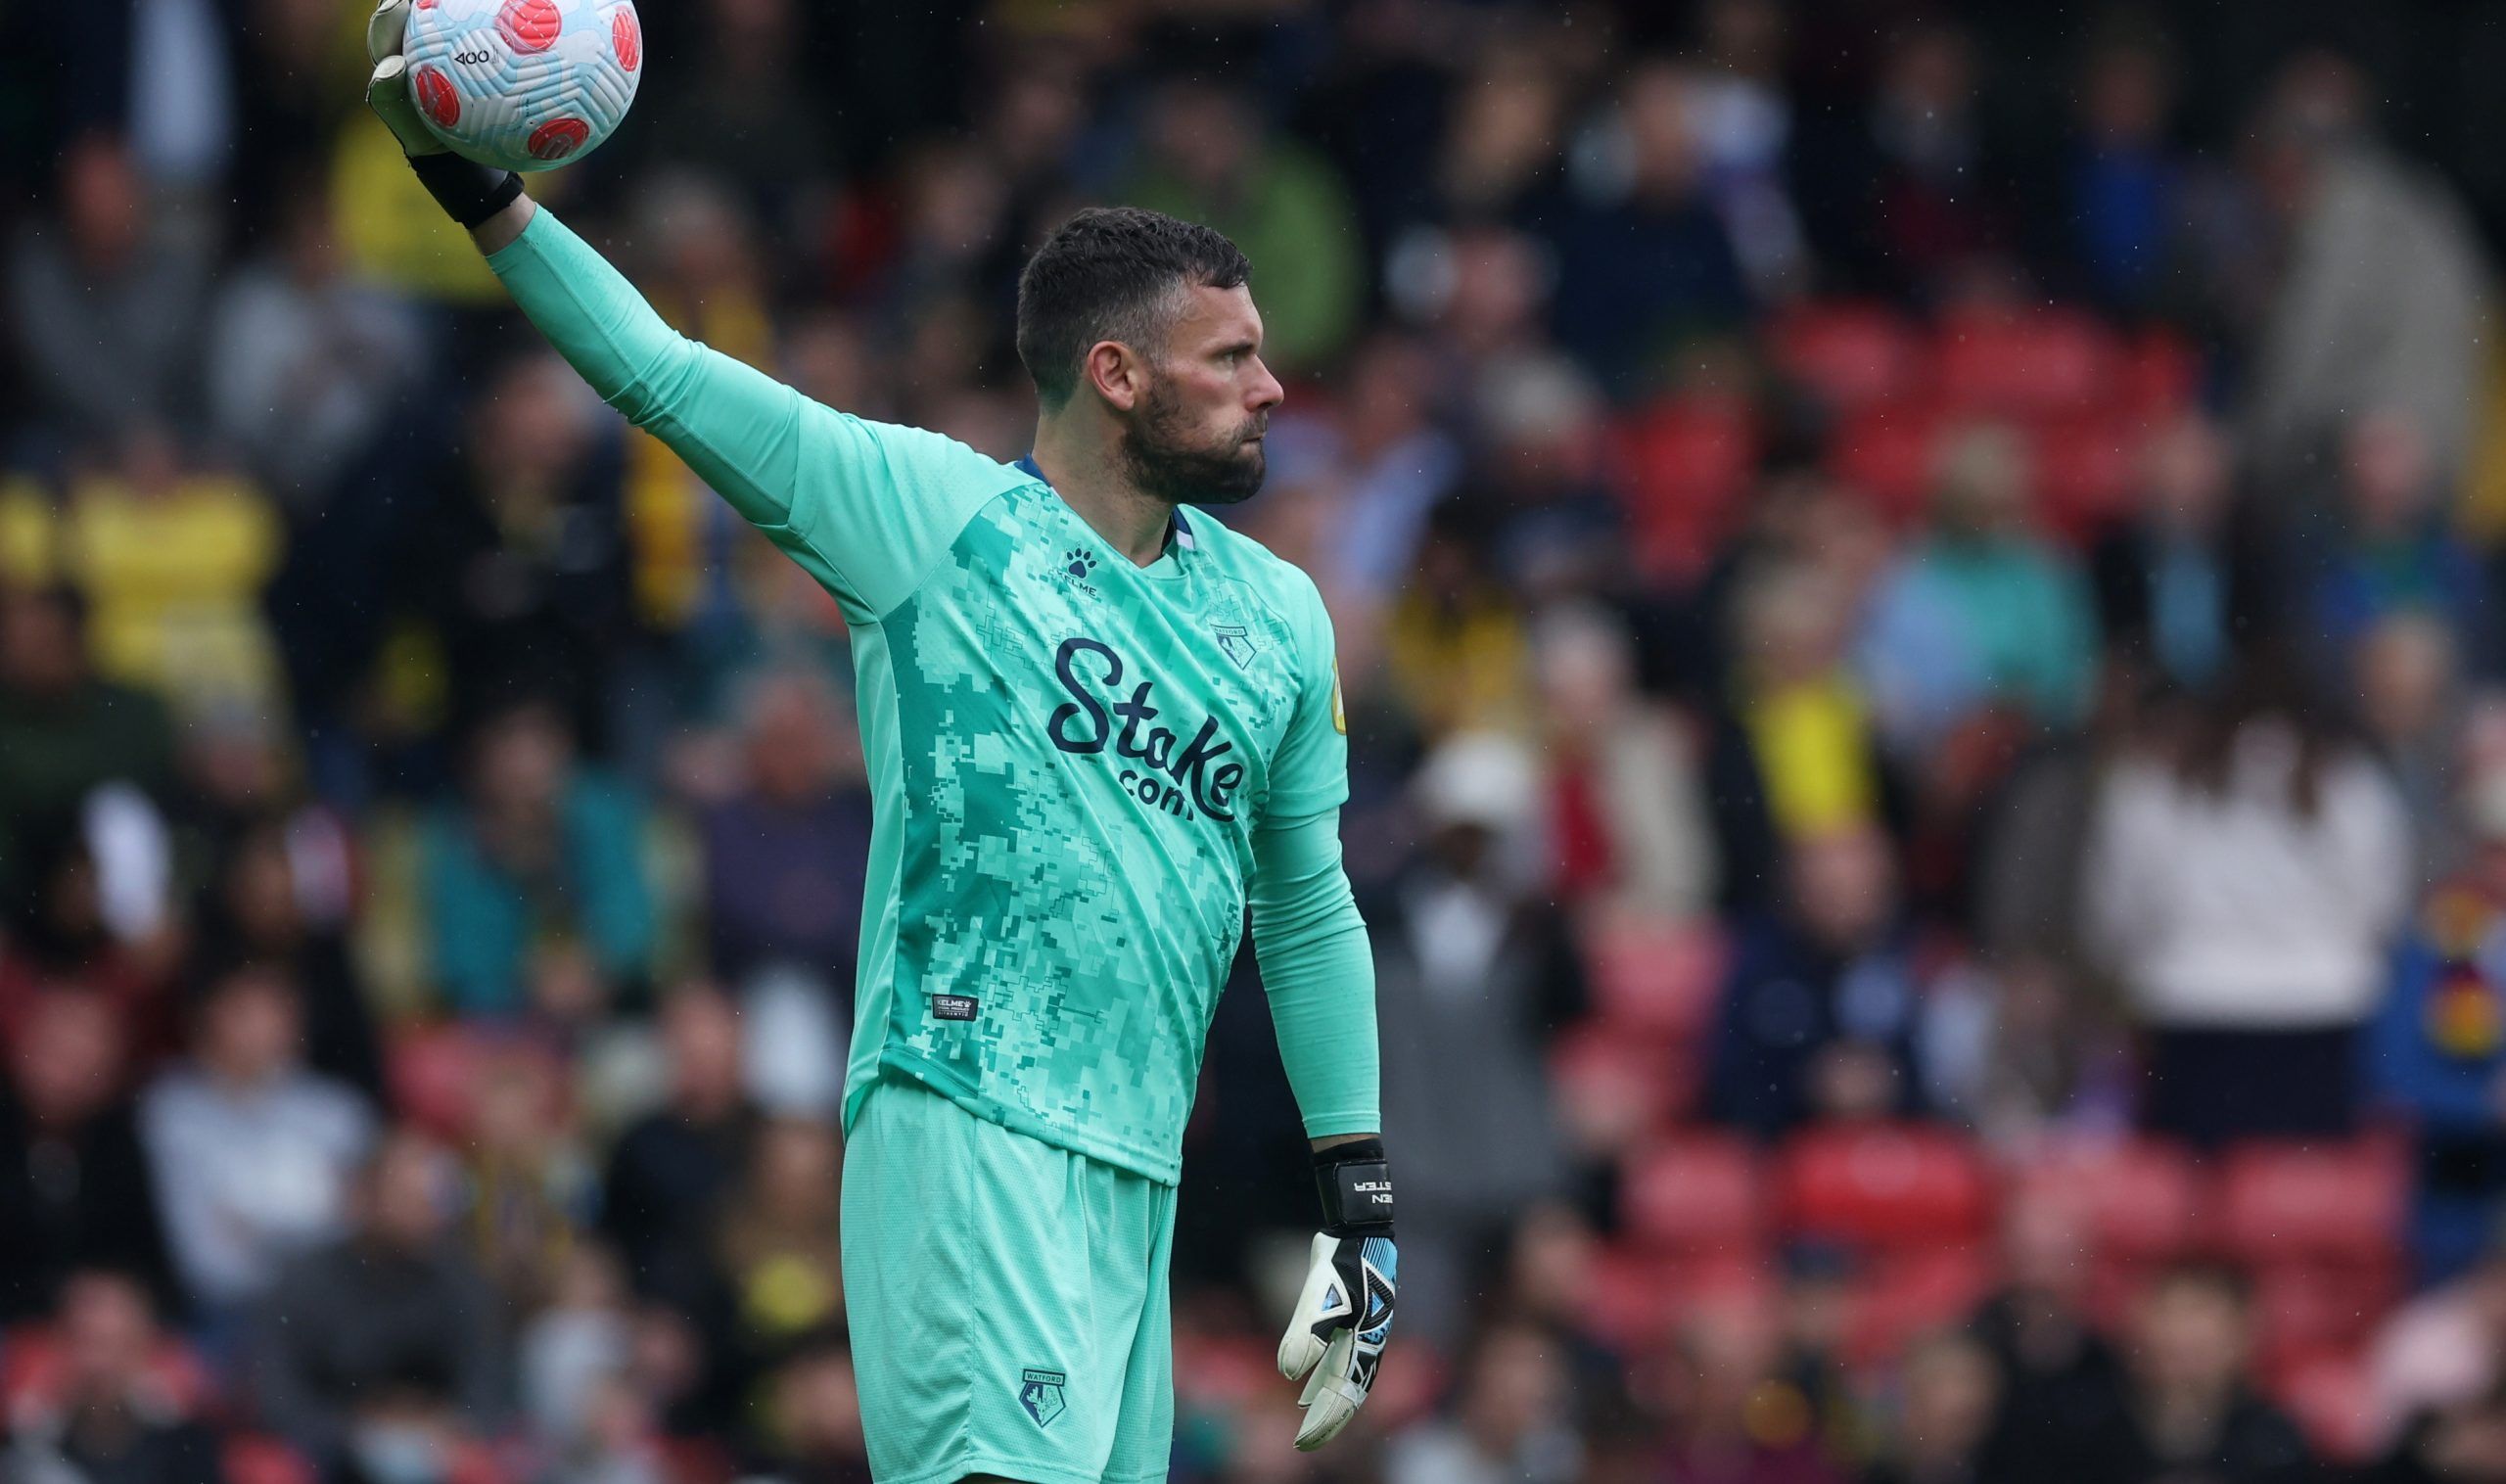 ben-foster-watford-transfer-aston-villa-transfer-news-fozcast-youtube-channel-aaron-ramsdale-arsenal-transfer-free-agent-leno-latestSoccer Football - Premier League - Watford v Leicester City - Vicarage Road, Watford, Britain - May 15, 2022 Watford's Ben Foster before the match Action Images via Reuters/Paul Childs EDITORIAL USE ONLY. No use with unauthorized audio, video, data, fixture lists, club/league logos or 'live' services. Online in-match use limited to 75 images, no video emulation. No 